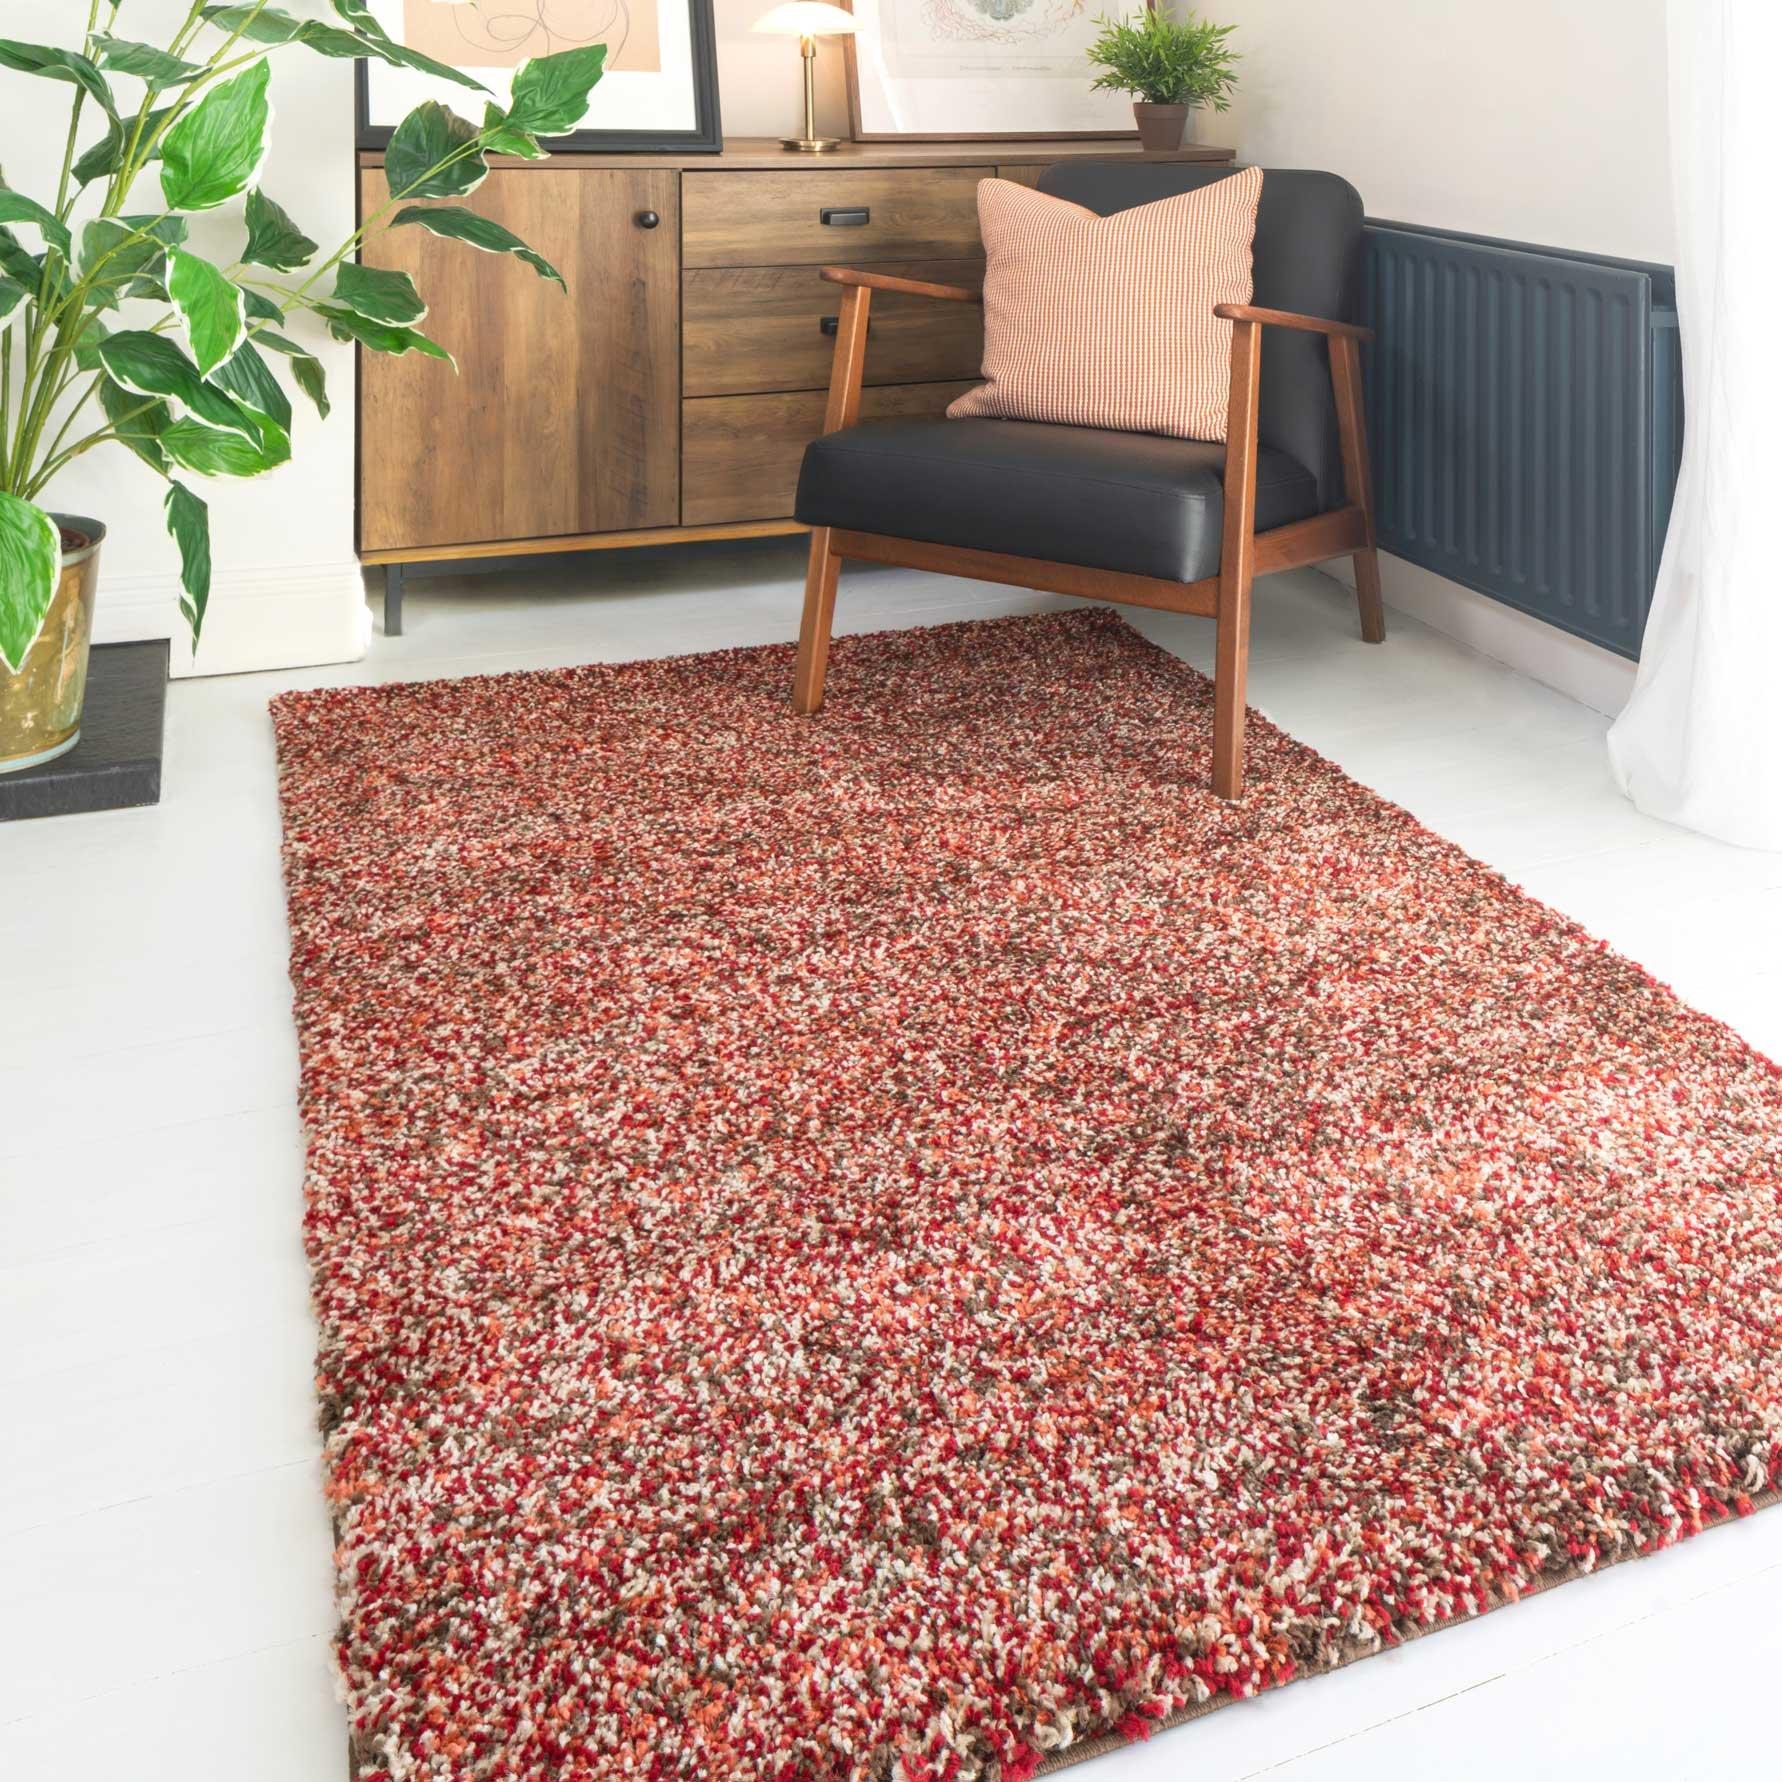 Red Brown Mottled Shaggy Rug